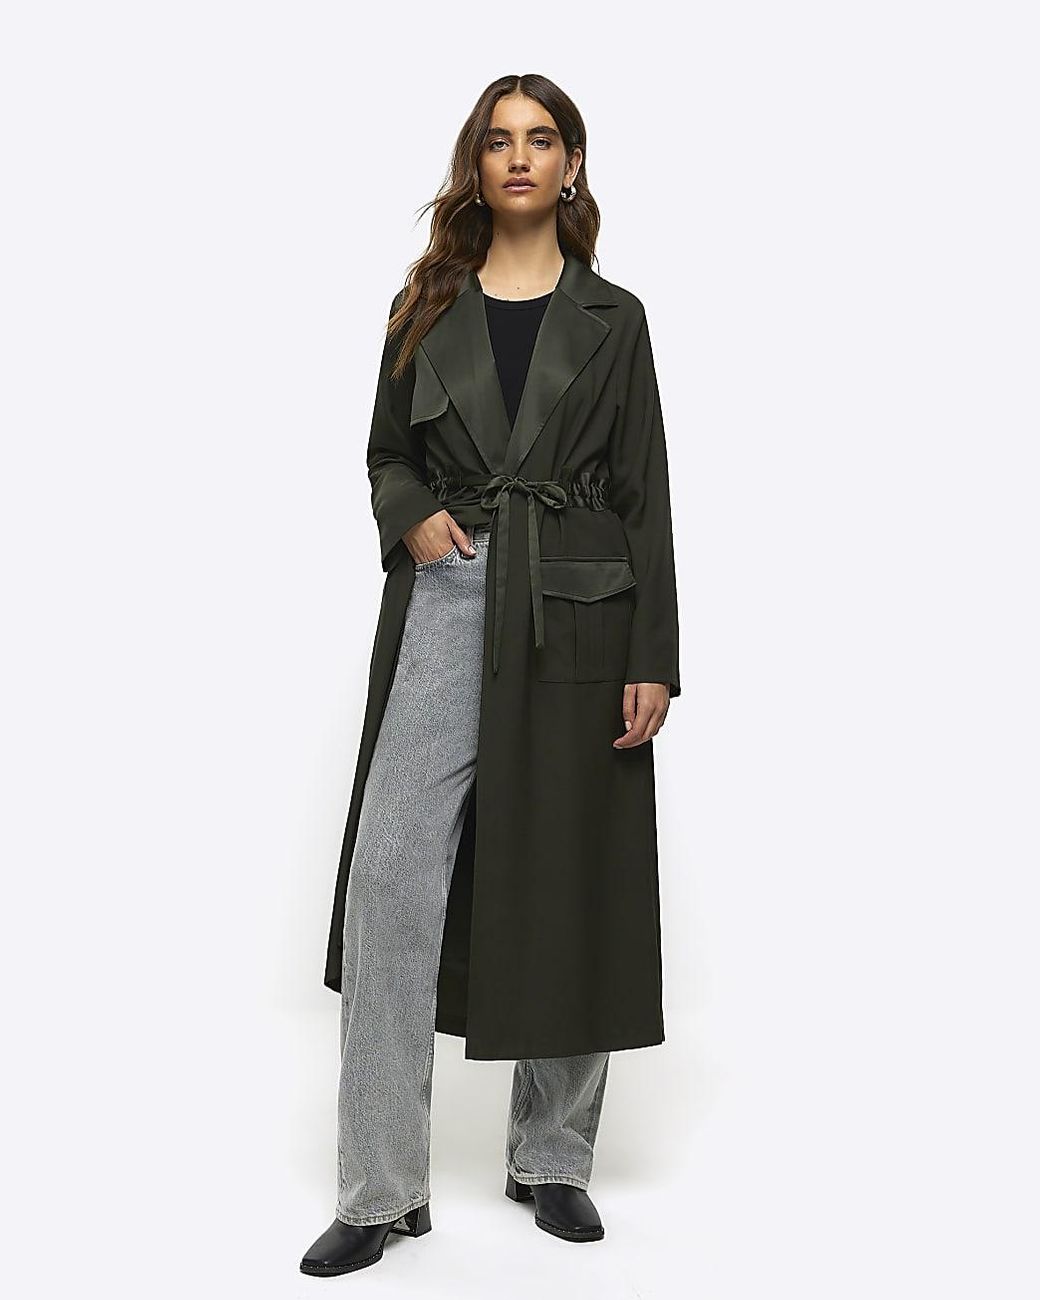 River Island Satin Belted Longline Duster Coat in Green